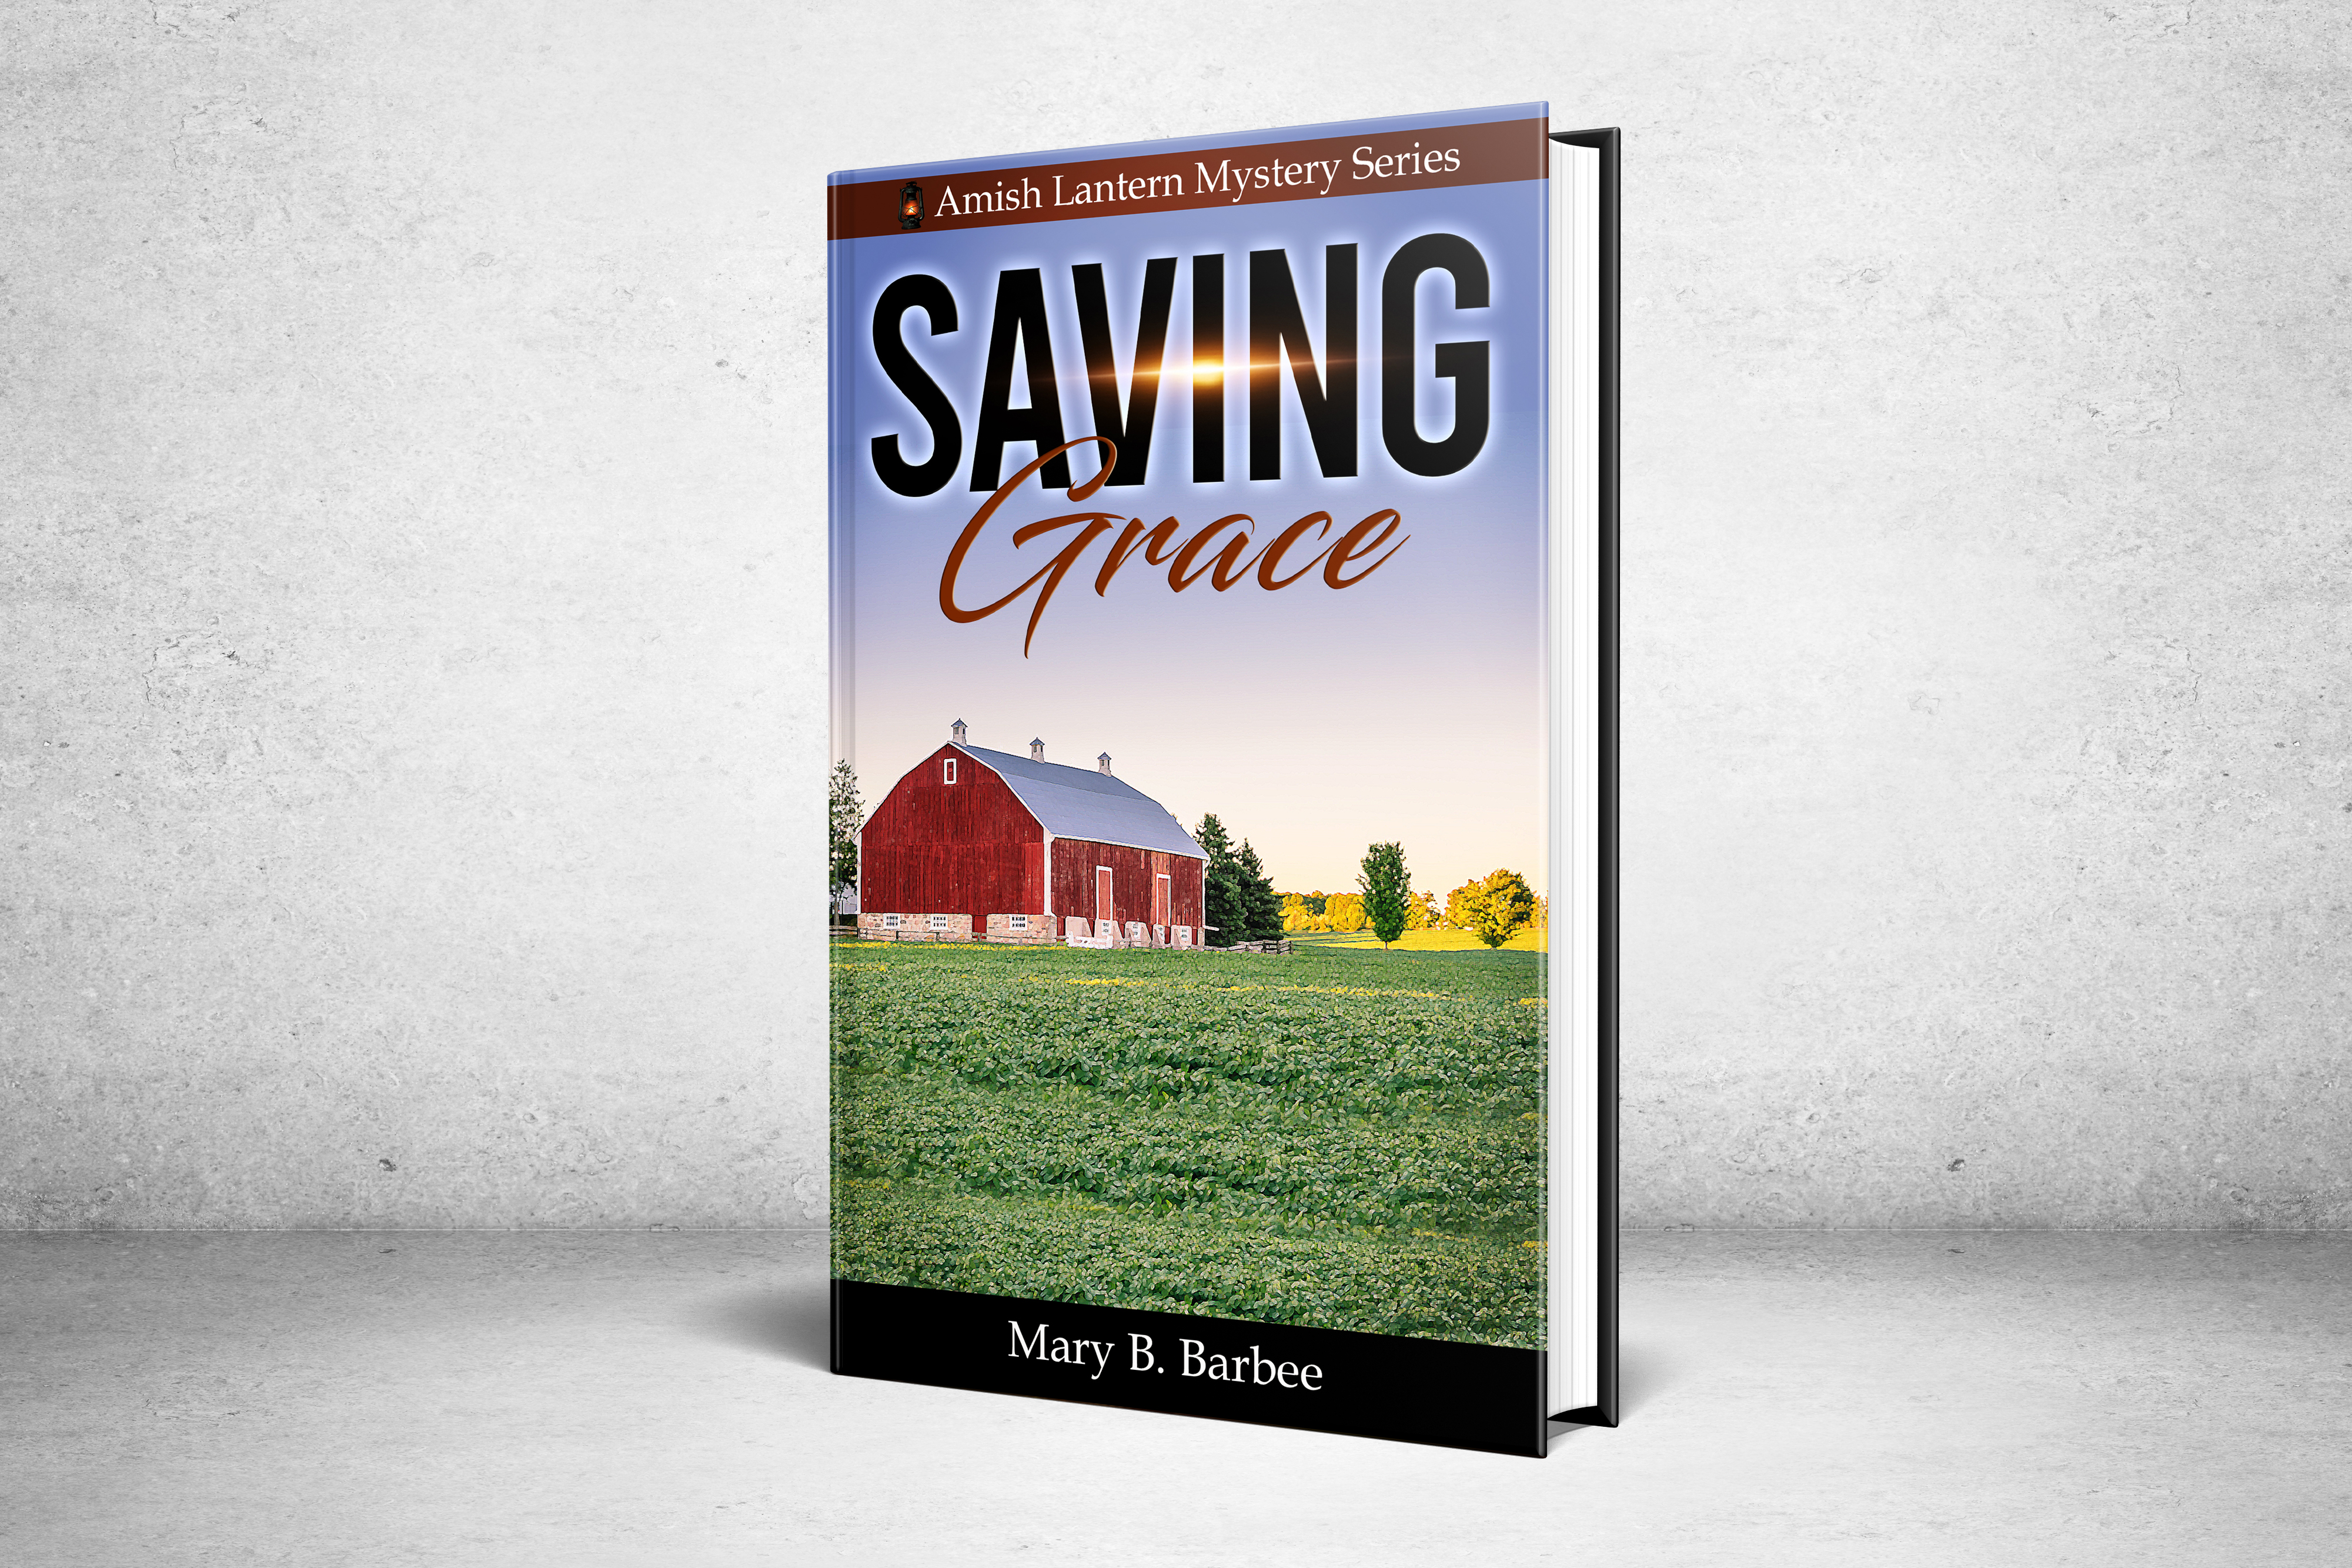 Saving Grace is now available in paperback!